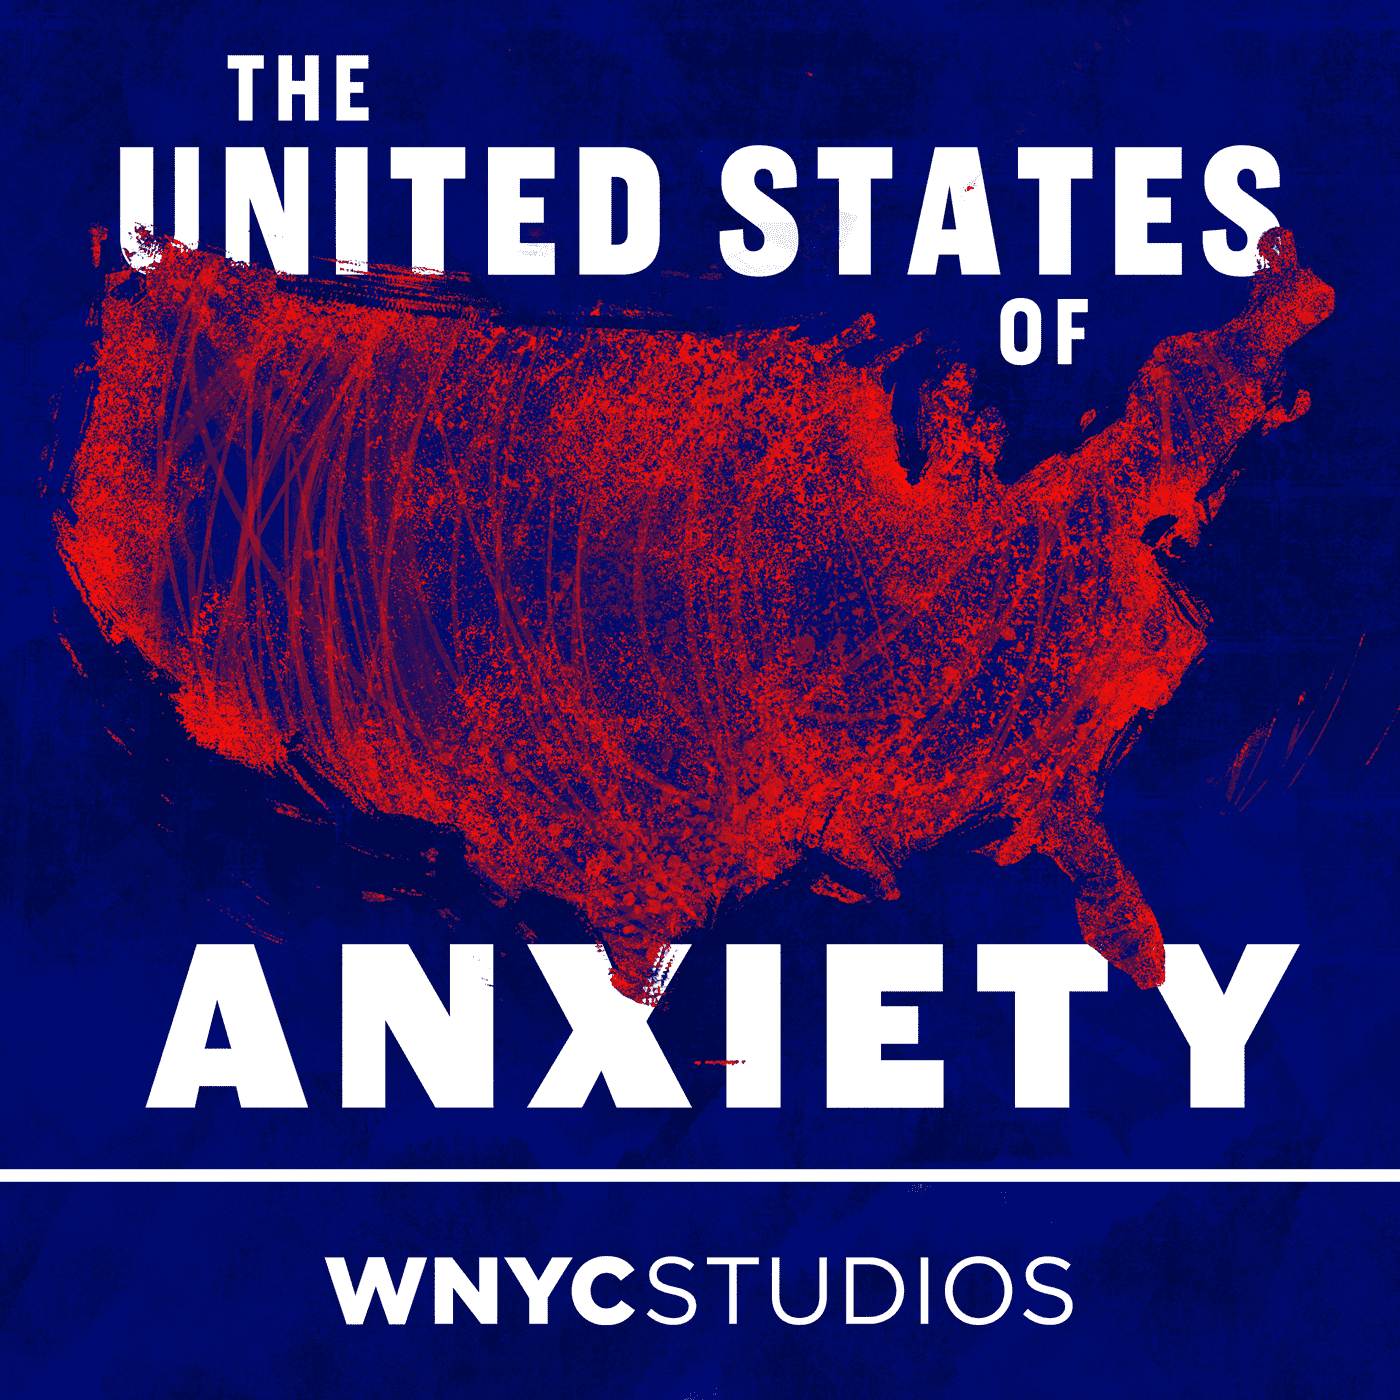 A United States of Anxiety listener in the suburbs calls in to explain why he’ll vote for Trump.